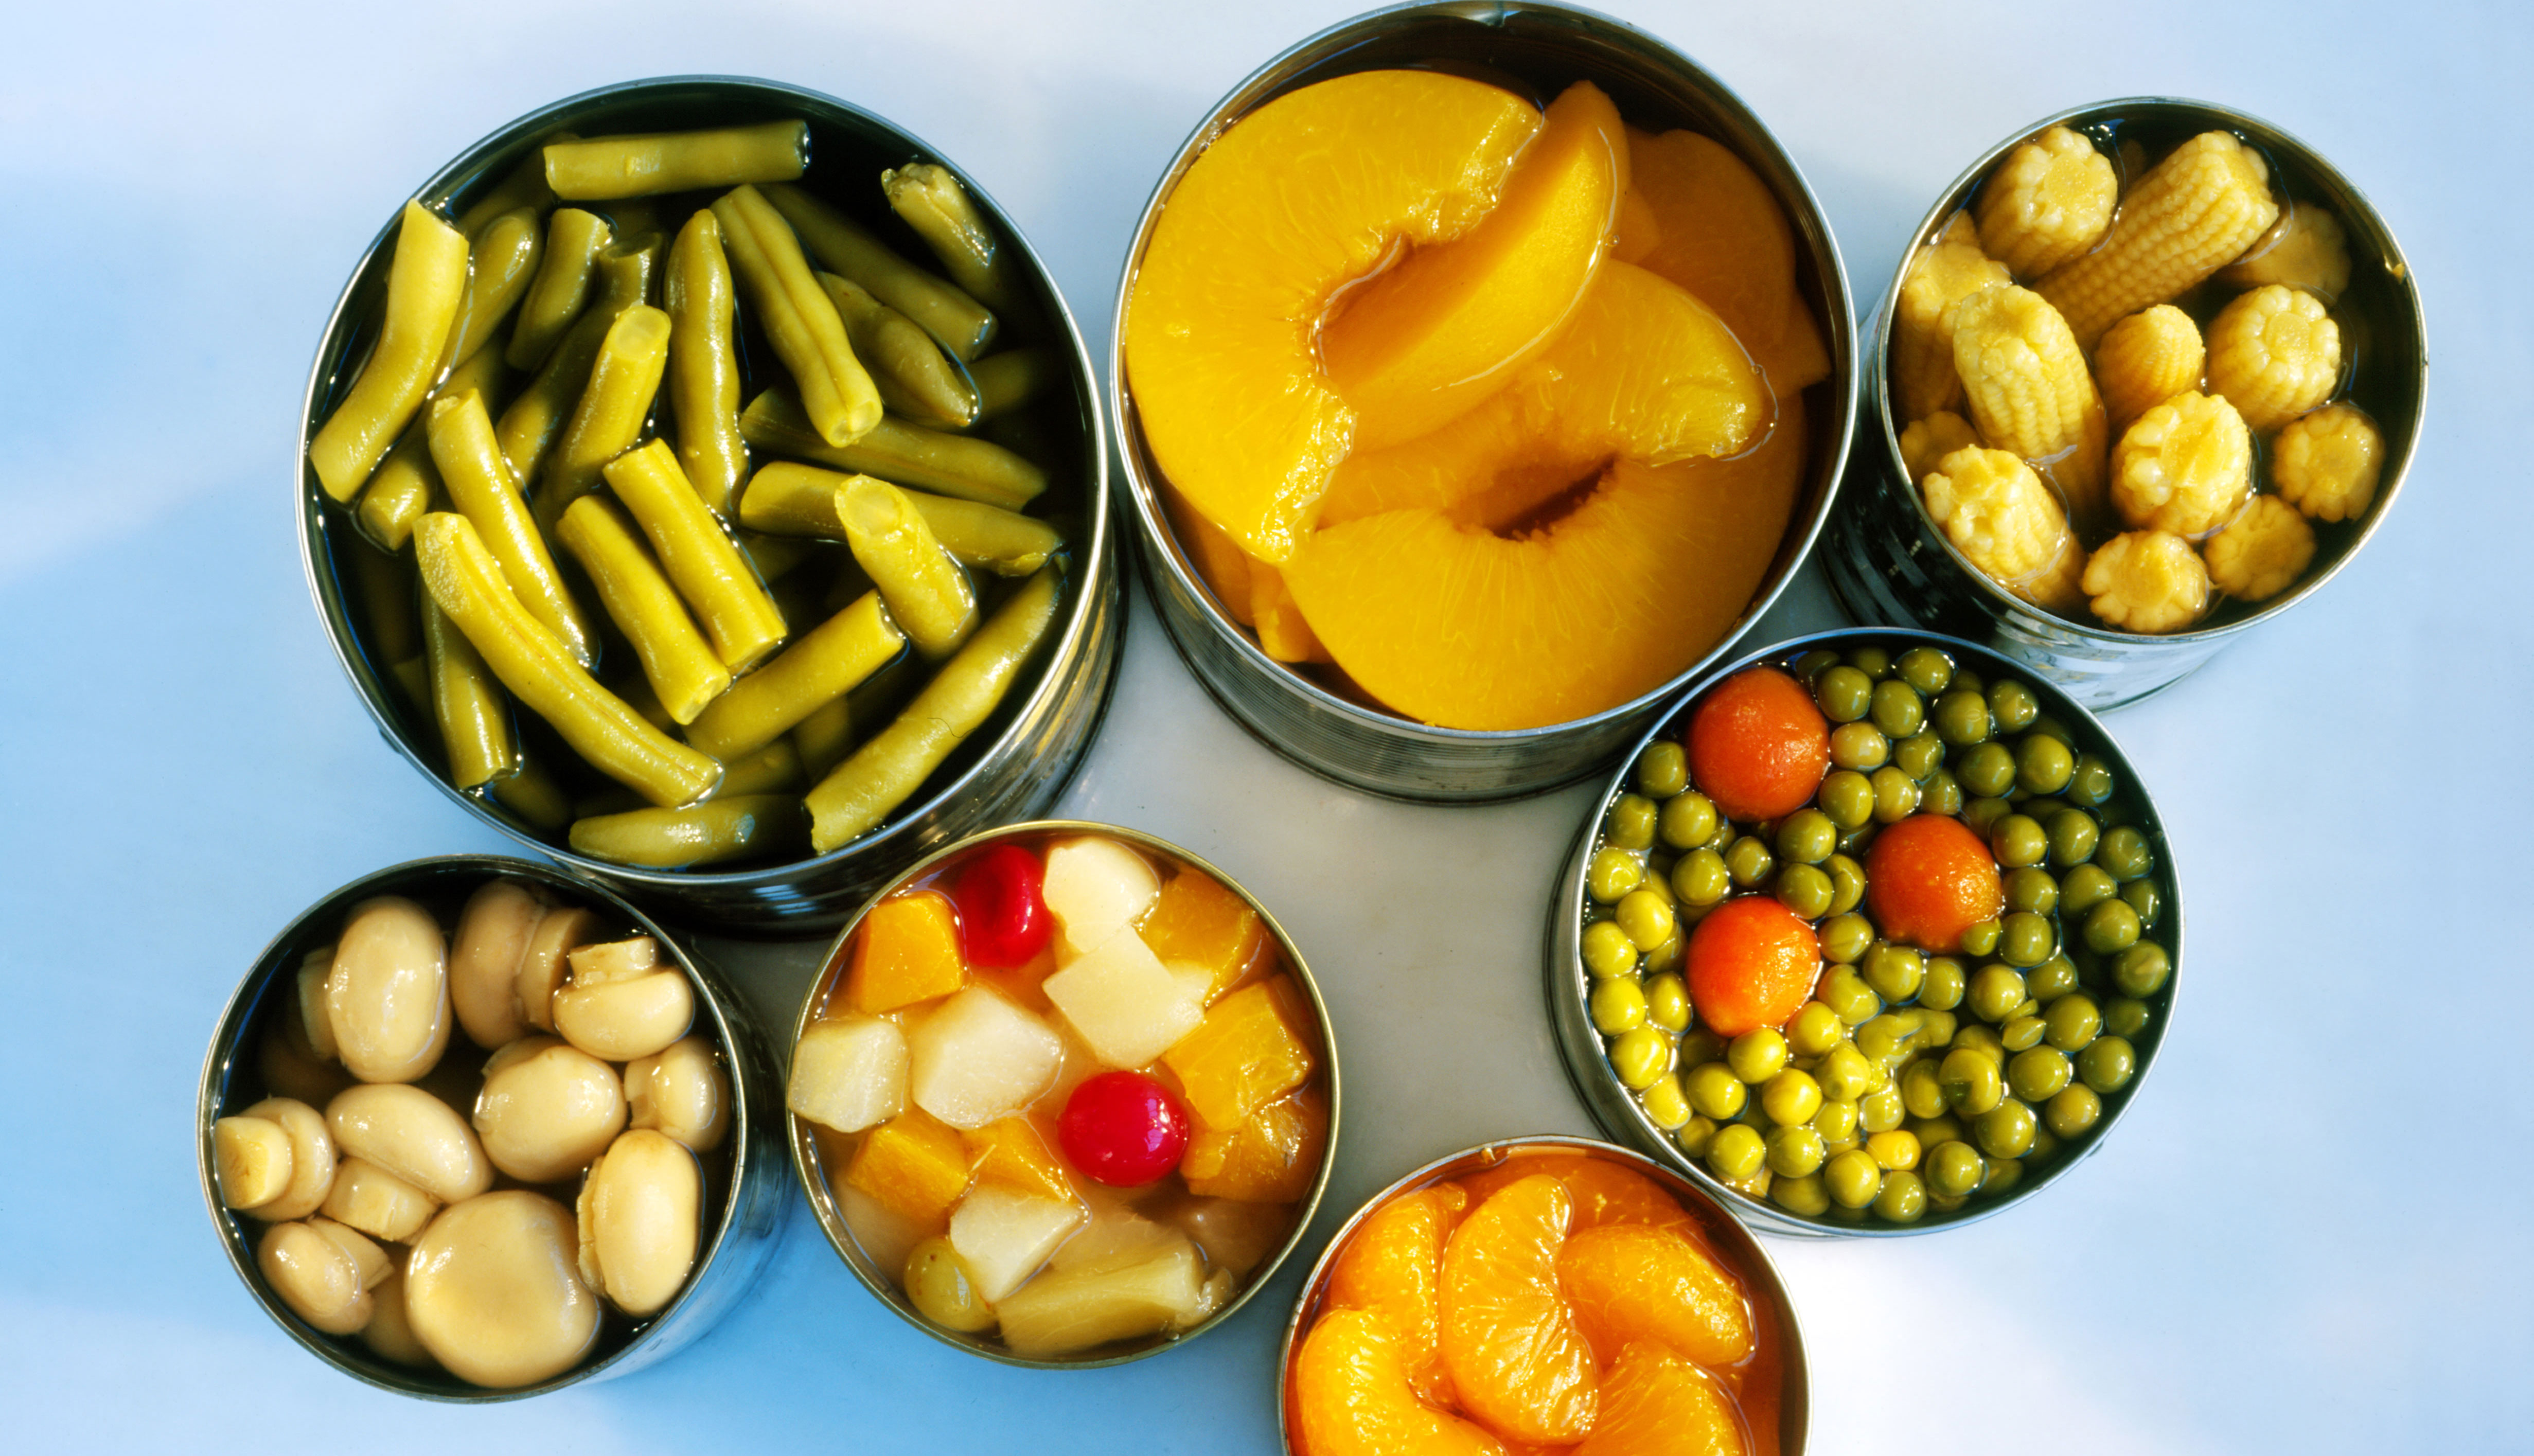 Canned fruit and vegetables